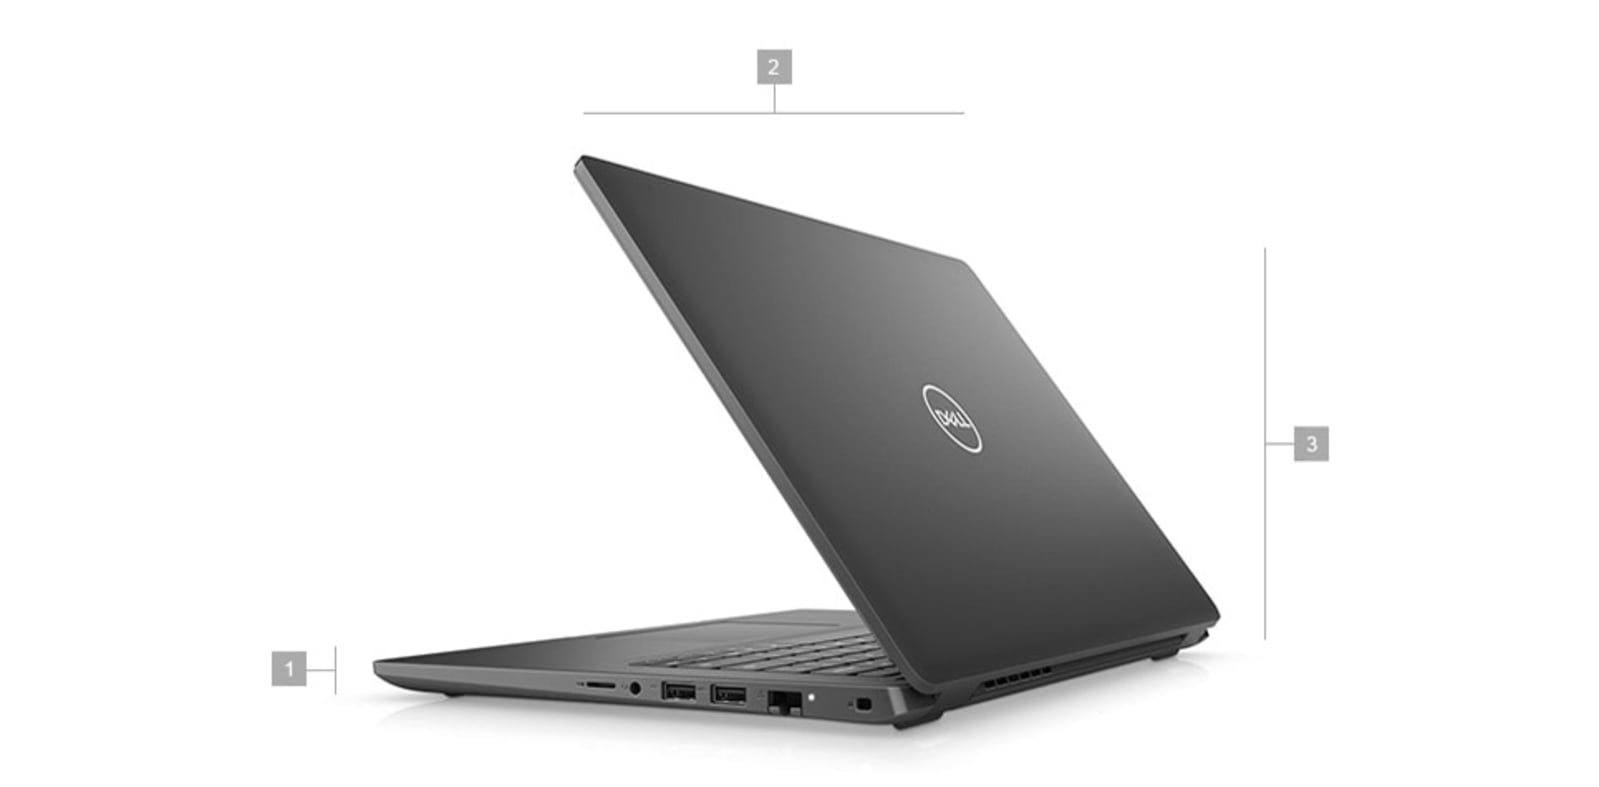 Restored Dell Latitude 3000 3410 Laptop (2020) | 14" FHD | Core i5 - 256GB SSD - 8GB RAM | 4 Cores @ 4.2 GHz - 10th Gen CPU (Refurbished) - image 1 of 11